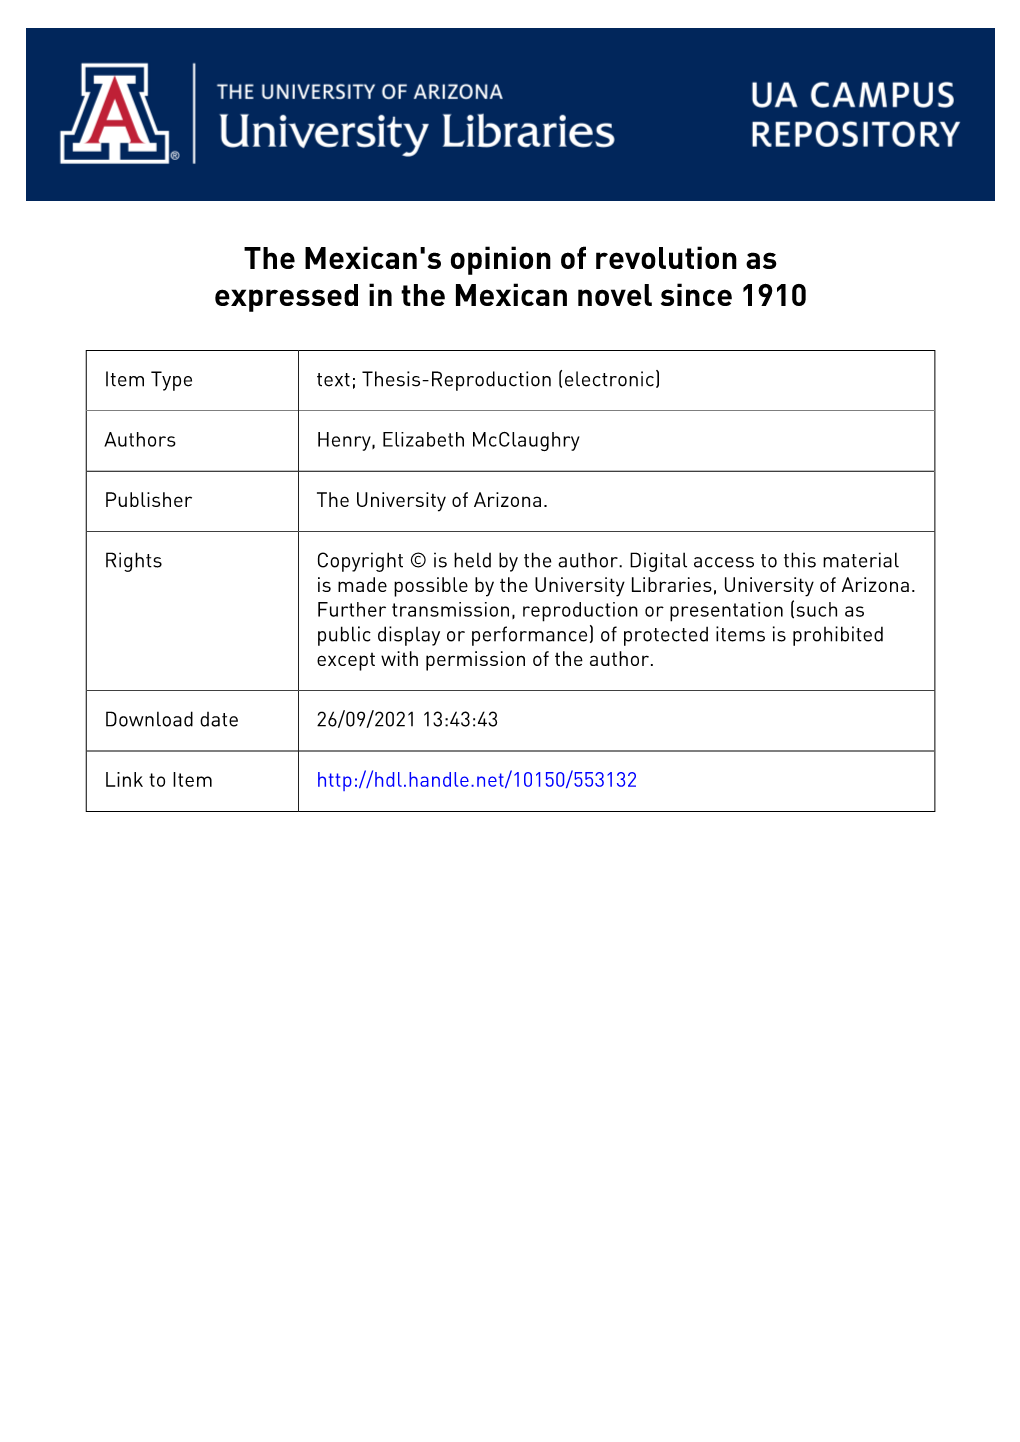 The Mexican's Opinion of Revolution As Expressed in the Mexican Novel Since 1910